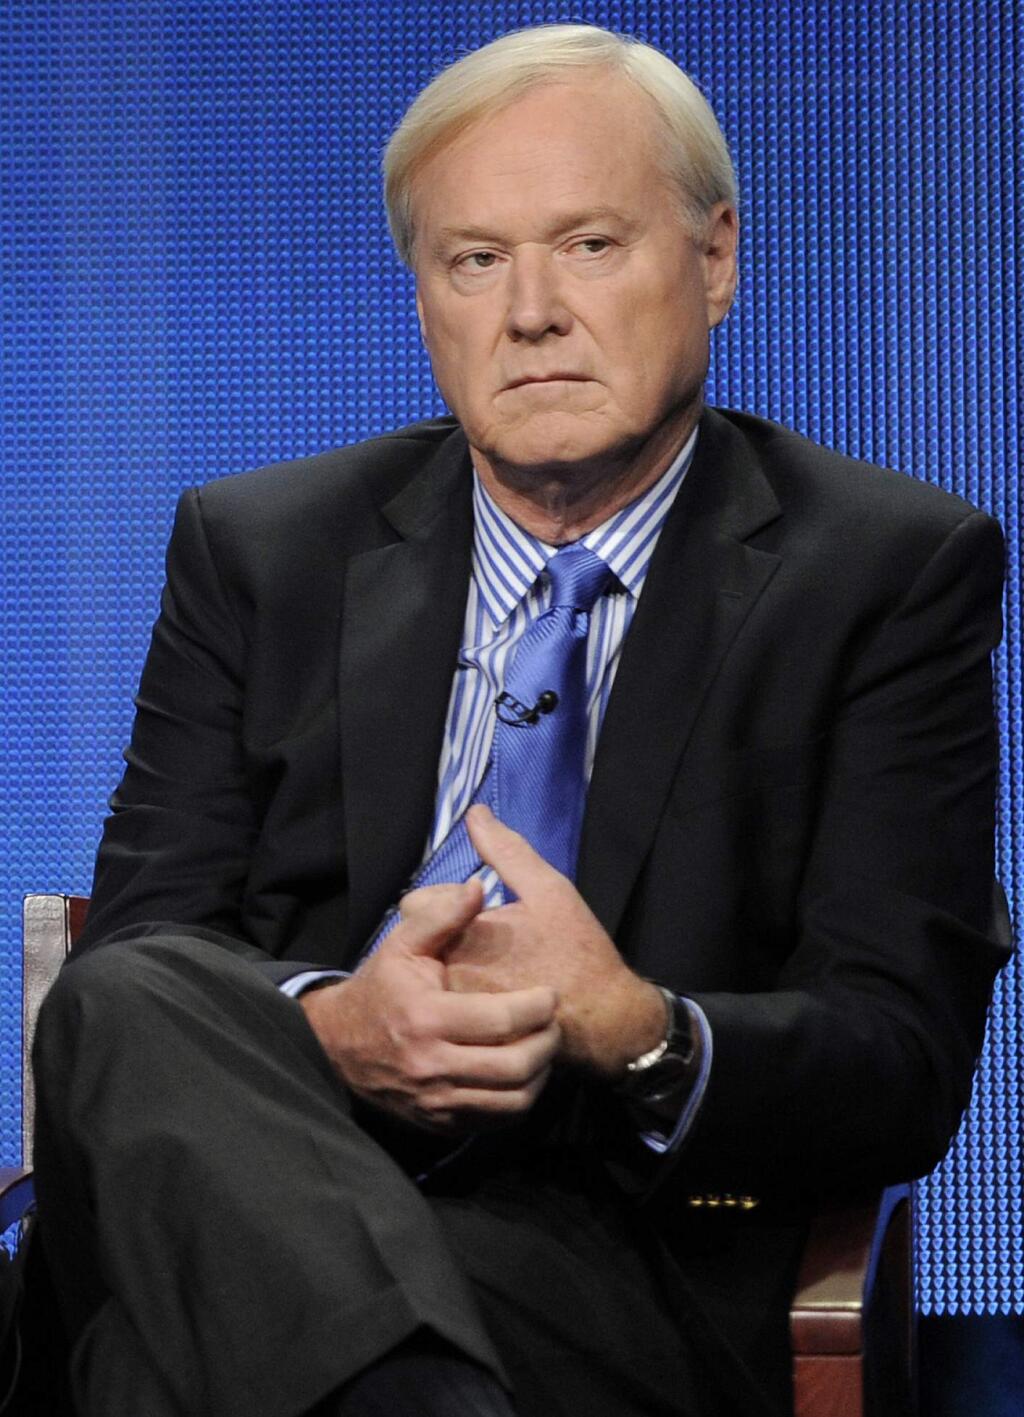 FILE - In this Tuesday, Aug. 2, 2011 file photo, Chris Matthews, host of 'Hardball' on MSNBC, is pictured at the NBC Universal summer press tour in Beverly Hills, Calif. A spokesman for MSNBC on Sunday, Dec. 17, 2017 confirmed a report that a staffer at the news channel nearly two decades ago had been paid and left her job after she complained she was sexually harassed by 'Hardball' host Chris Matthews. (AP Photo/Chris Pizzello, File)